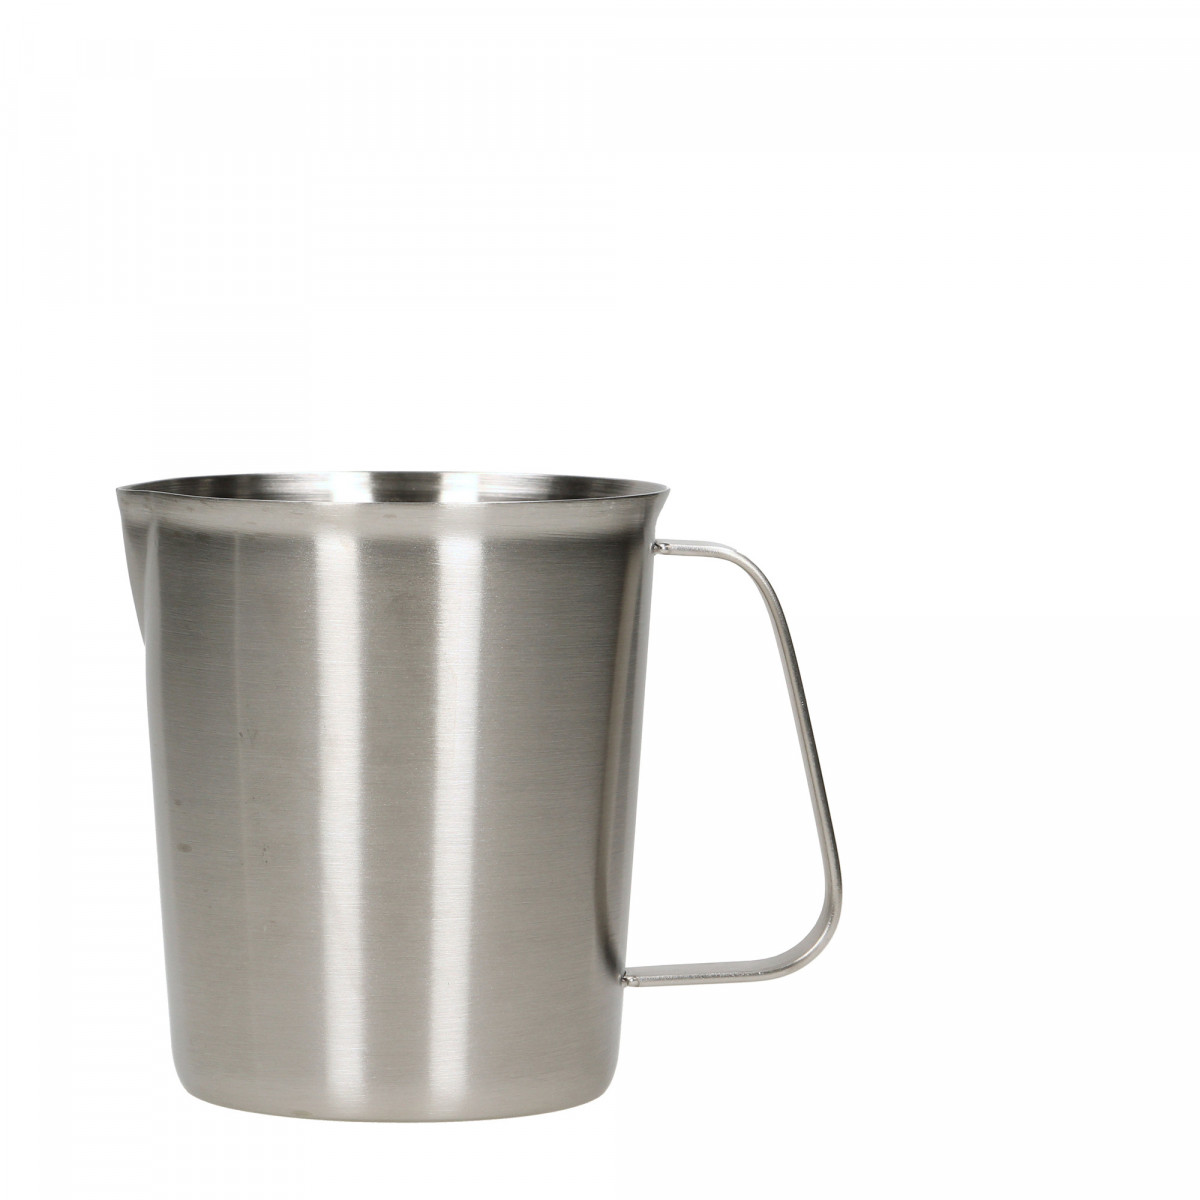 Graduated SST measuring cup - 500 ml